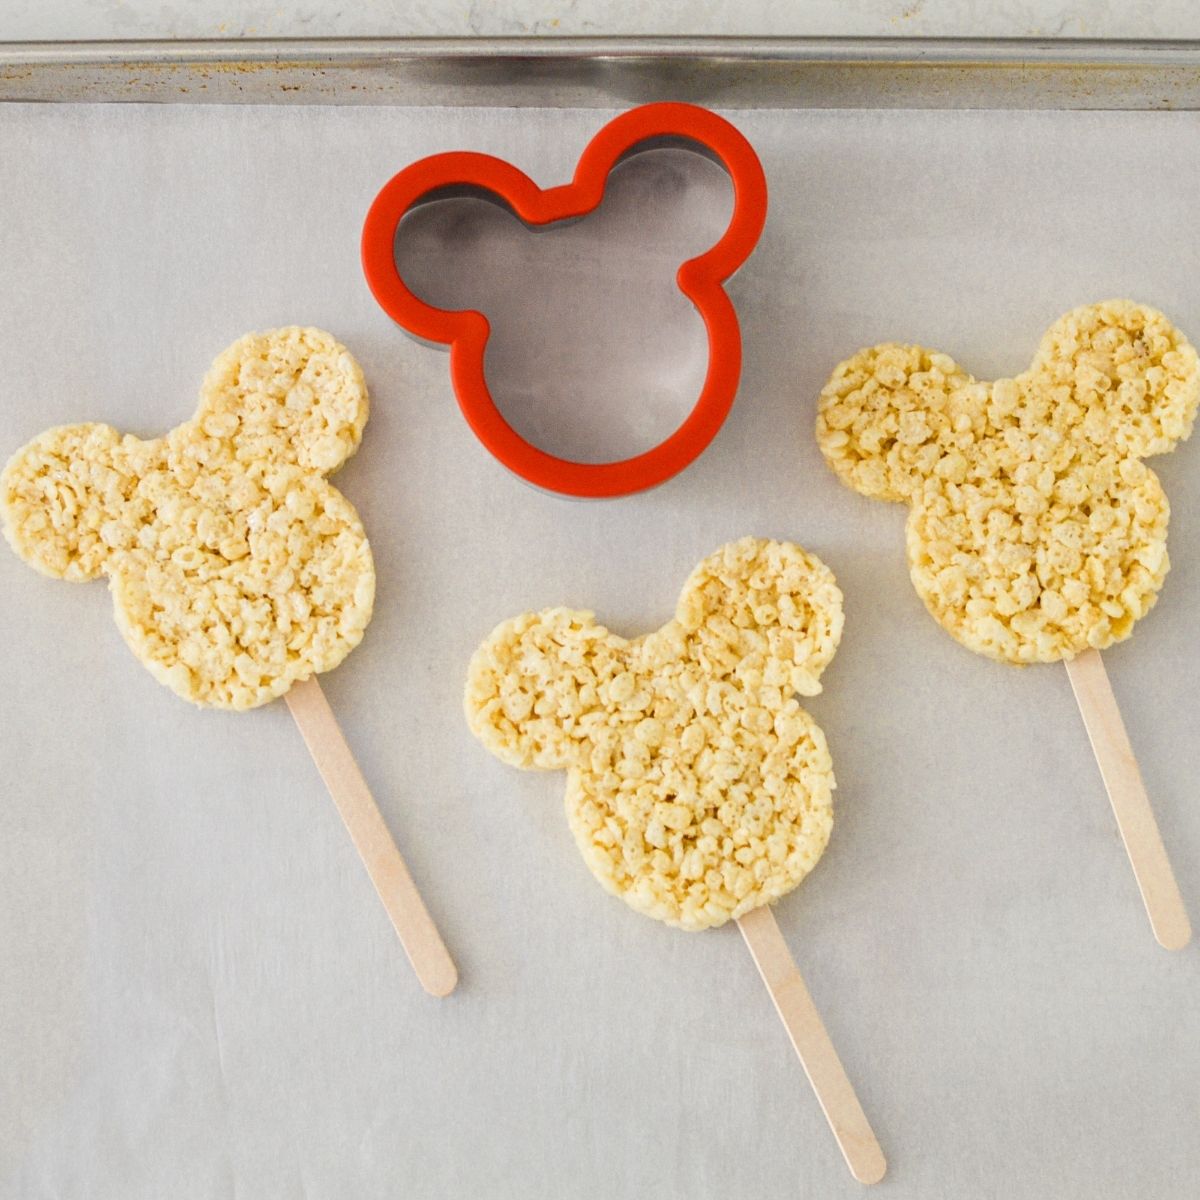 These Minnie Witch Rice Krispies Treats are so easy to make at home.  They taste and look just like the ones at Disneyland.  